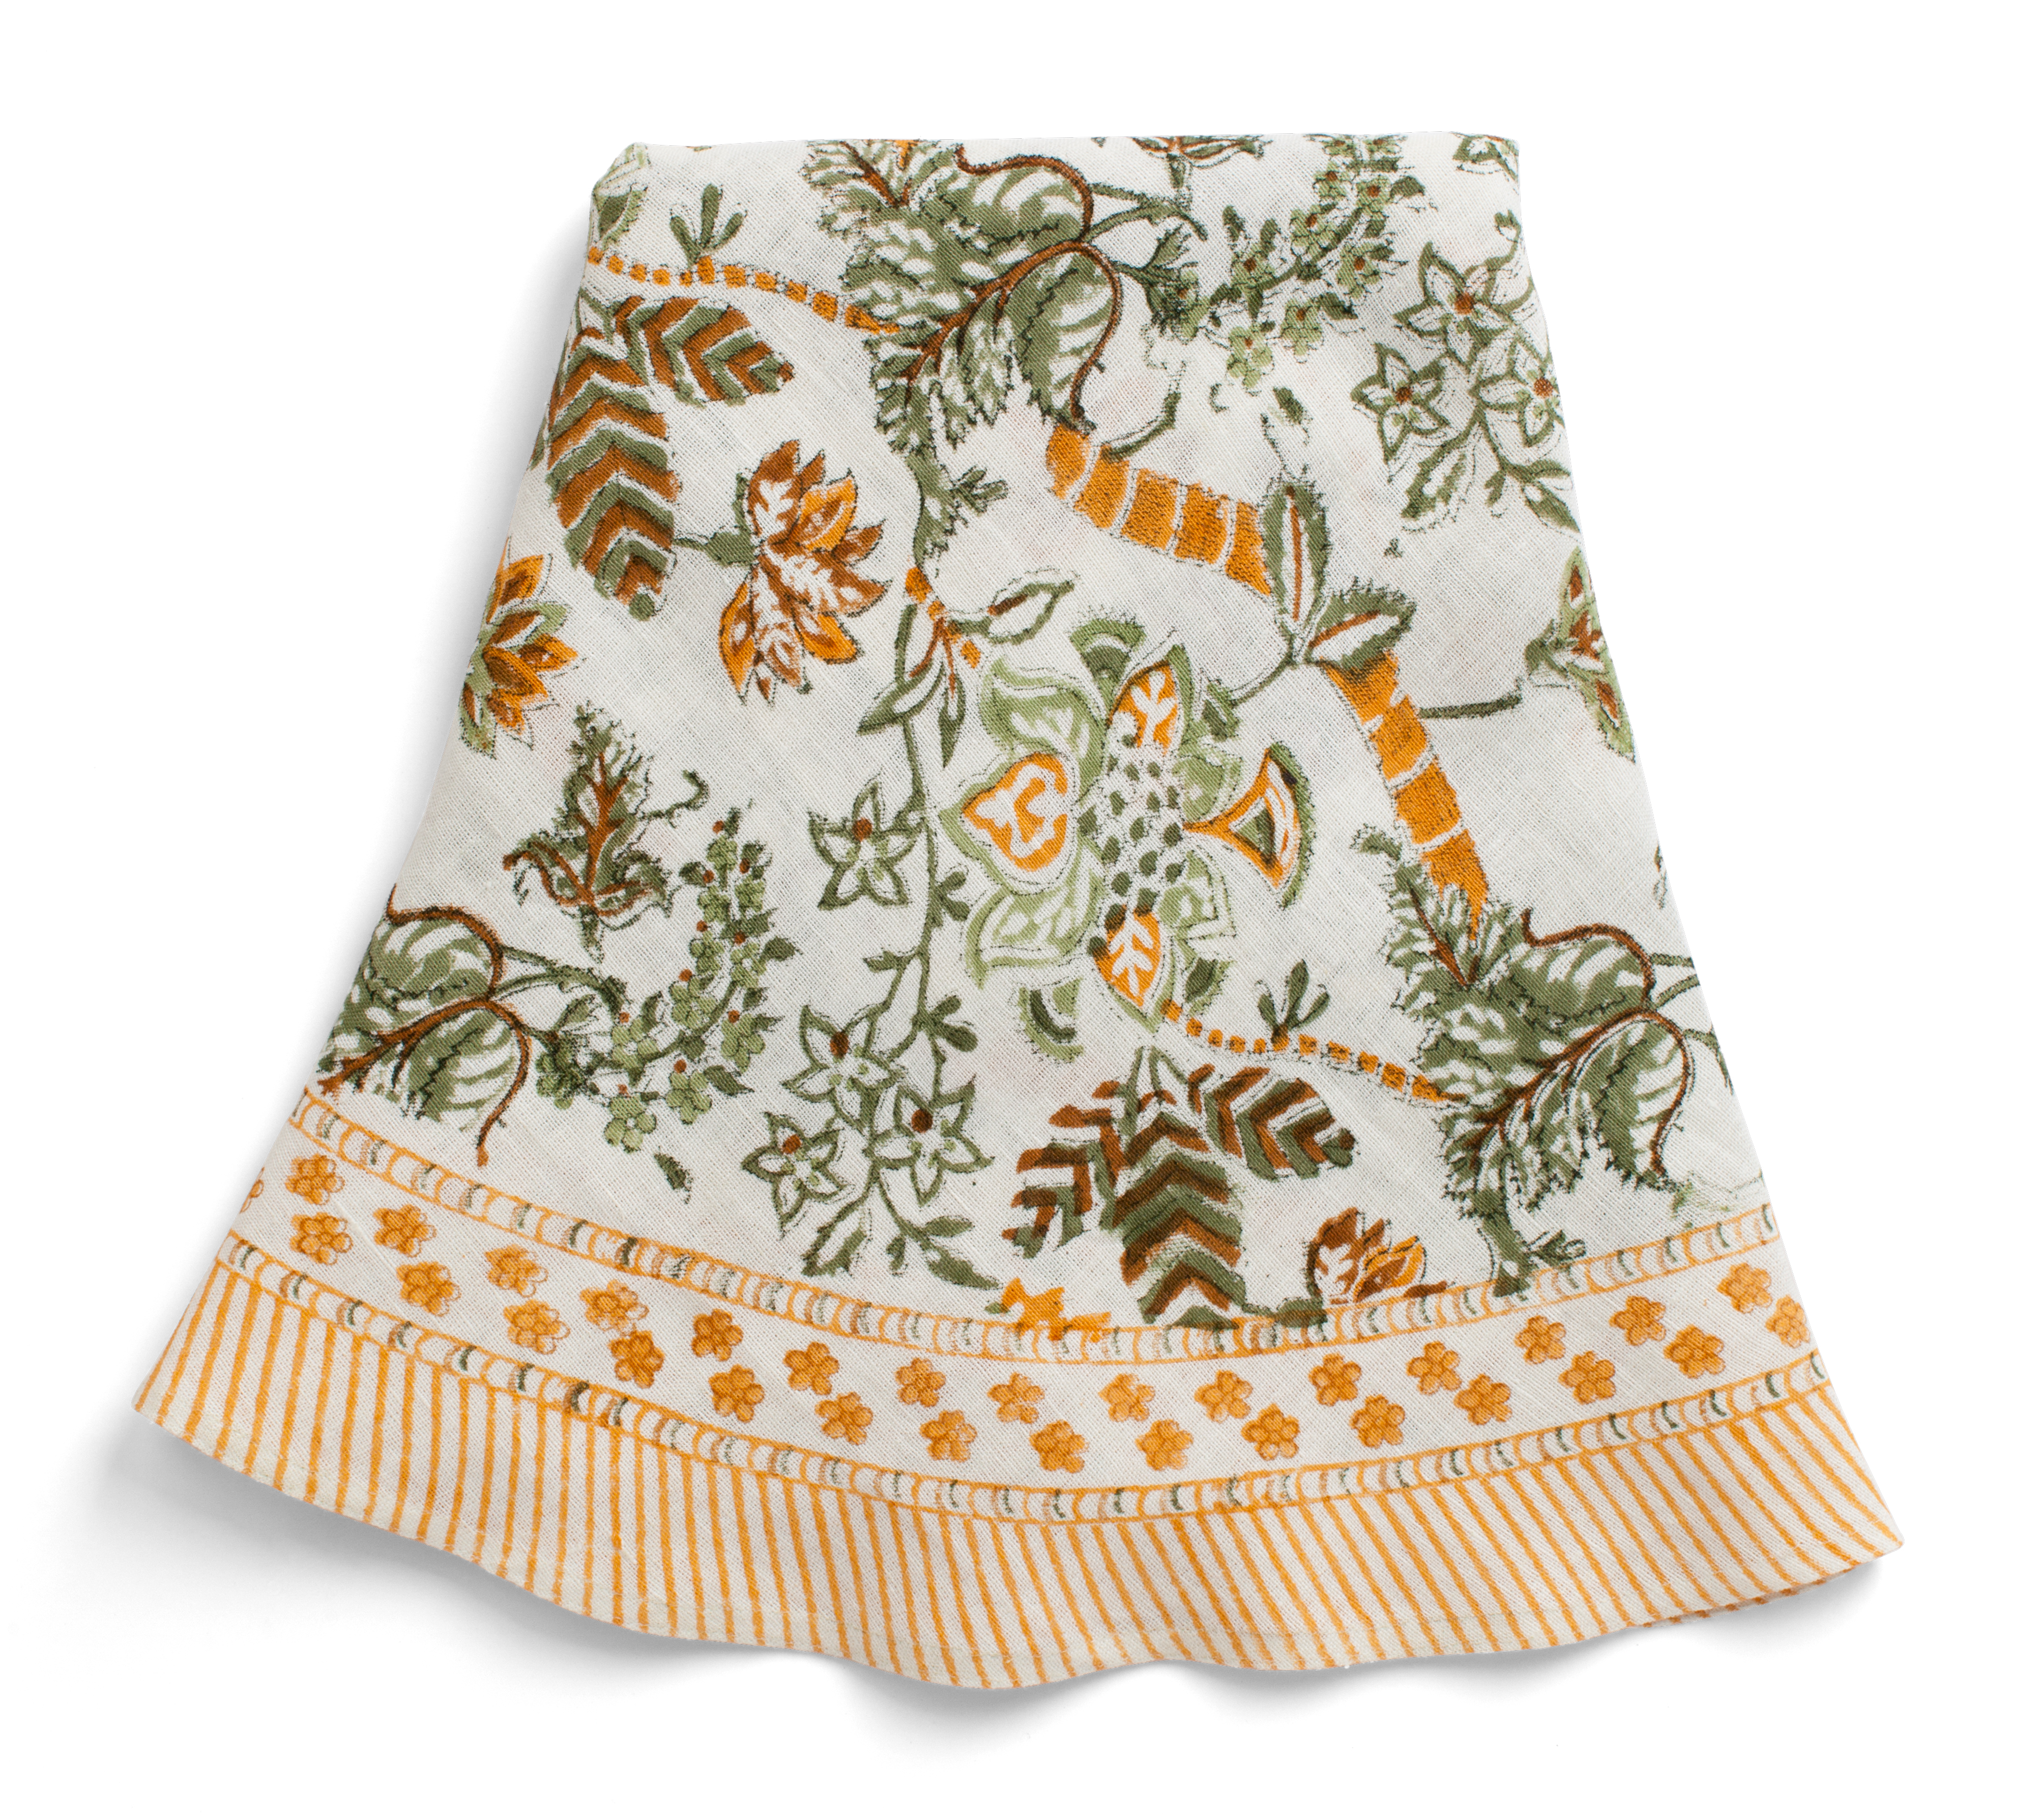 Round linen tablecloth with Floral print in Ochre